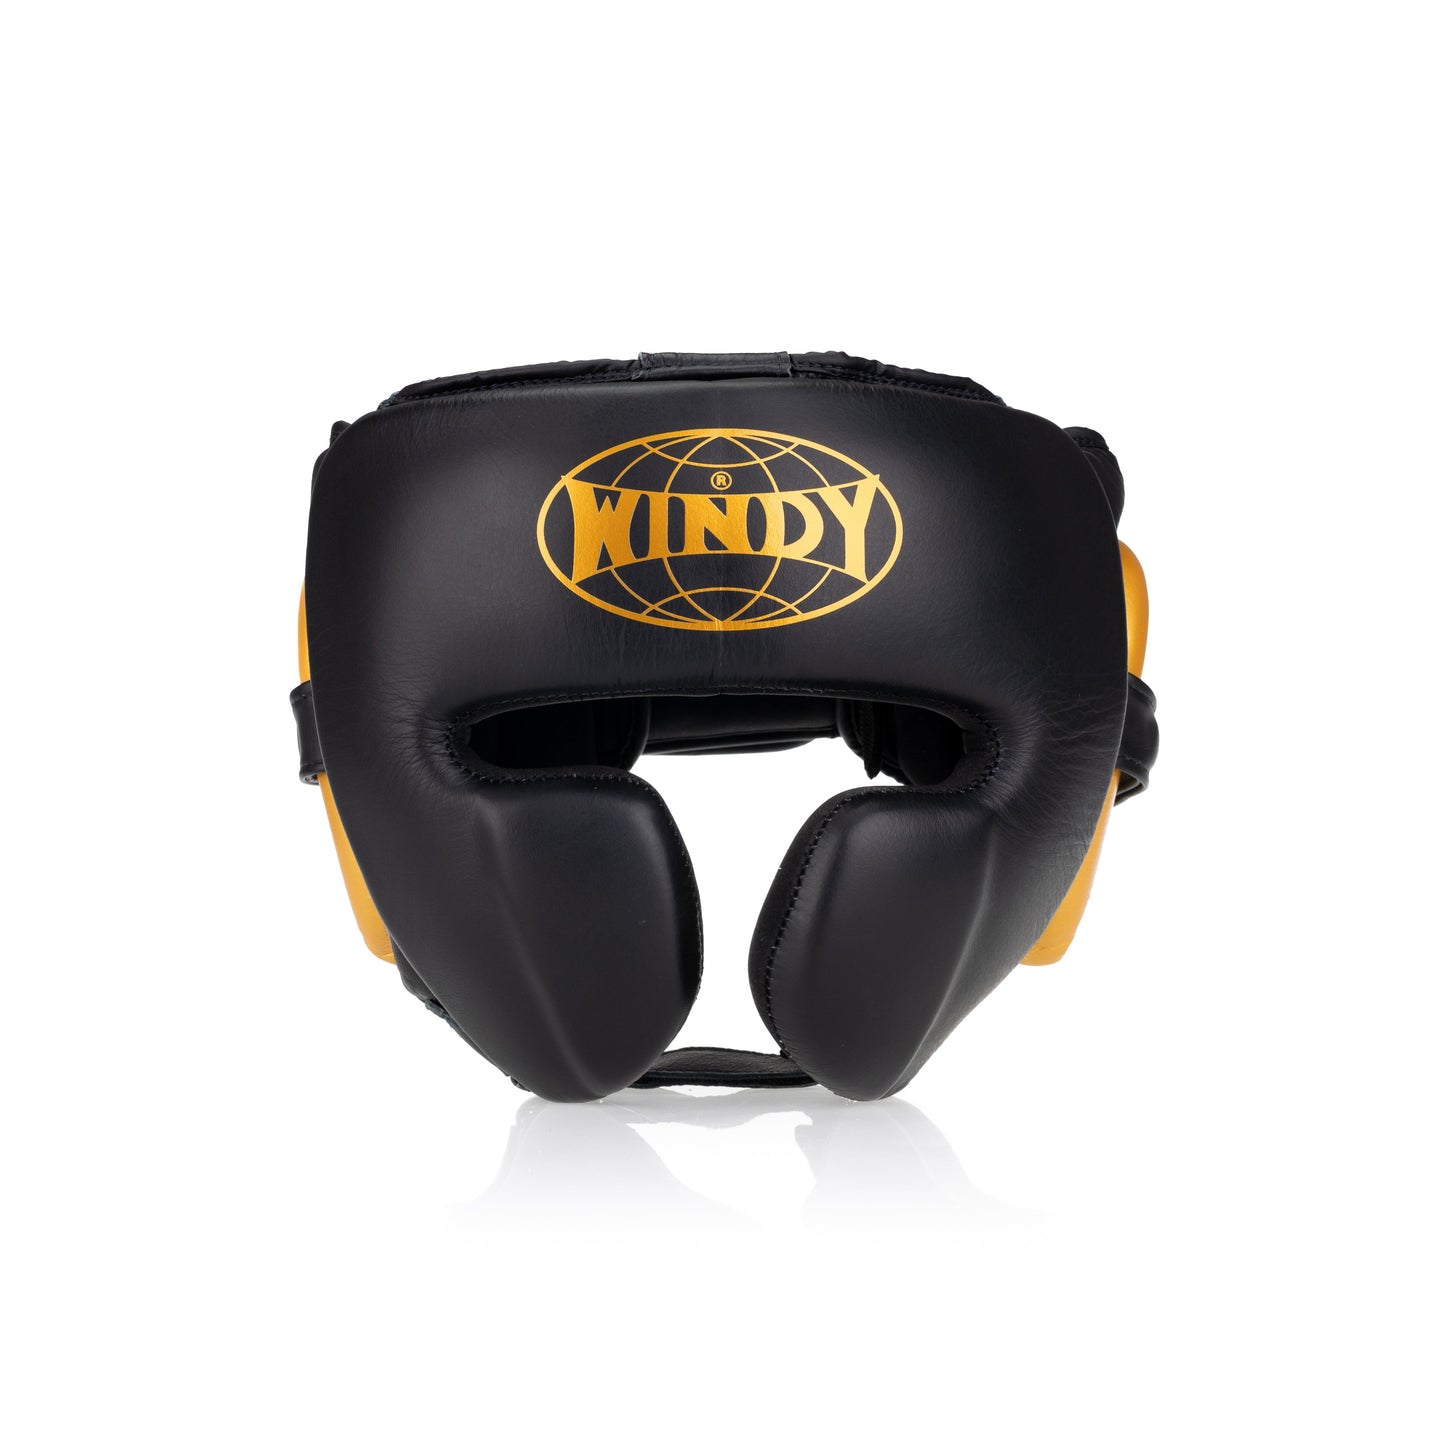 Mexican Style Headguard - Black/Gold